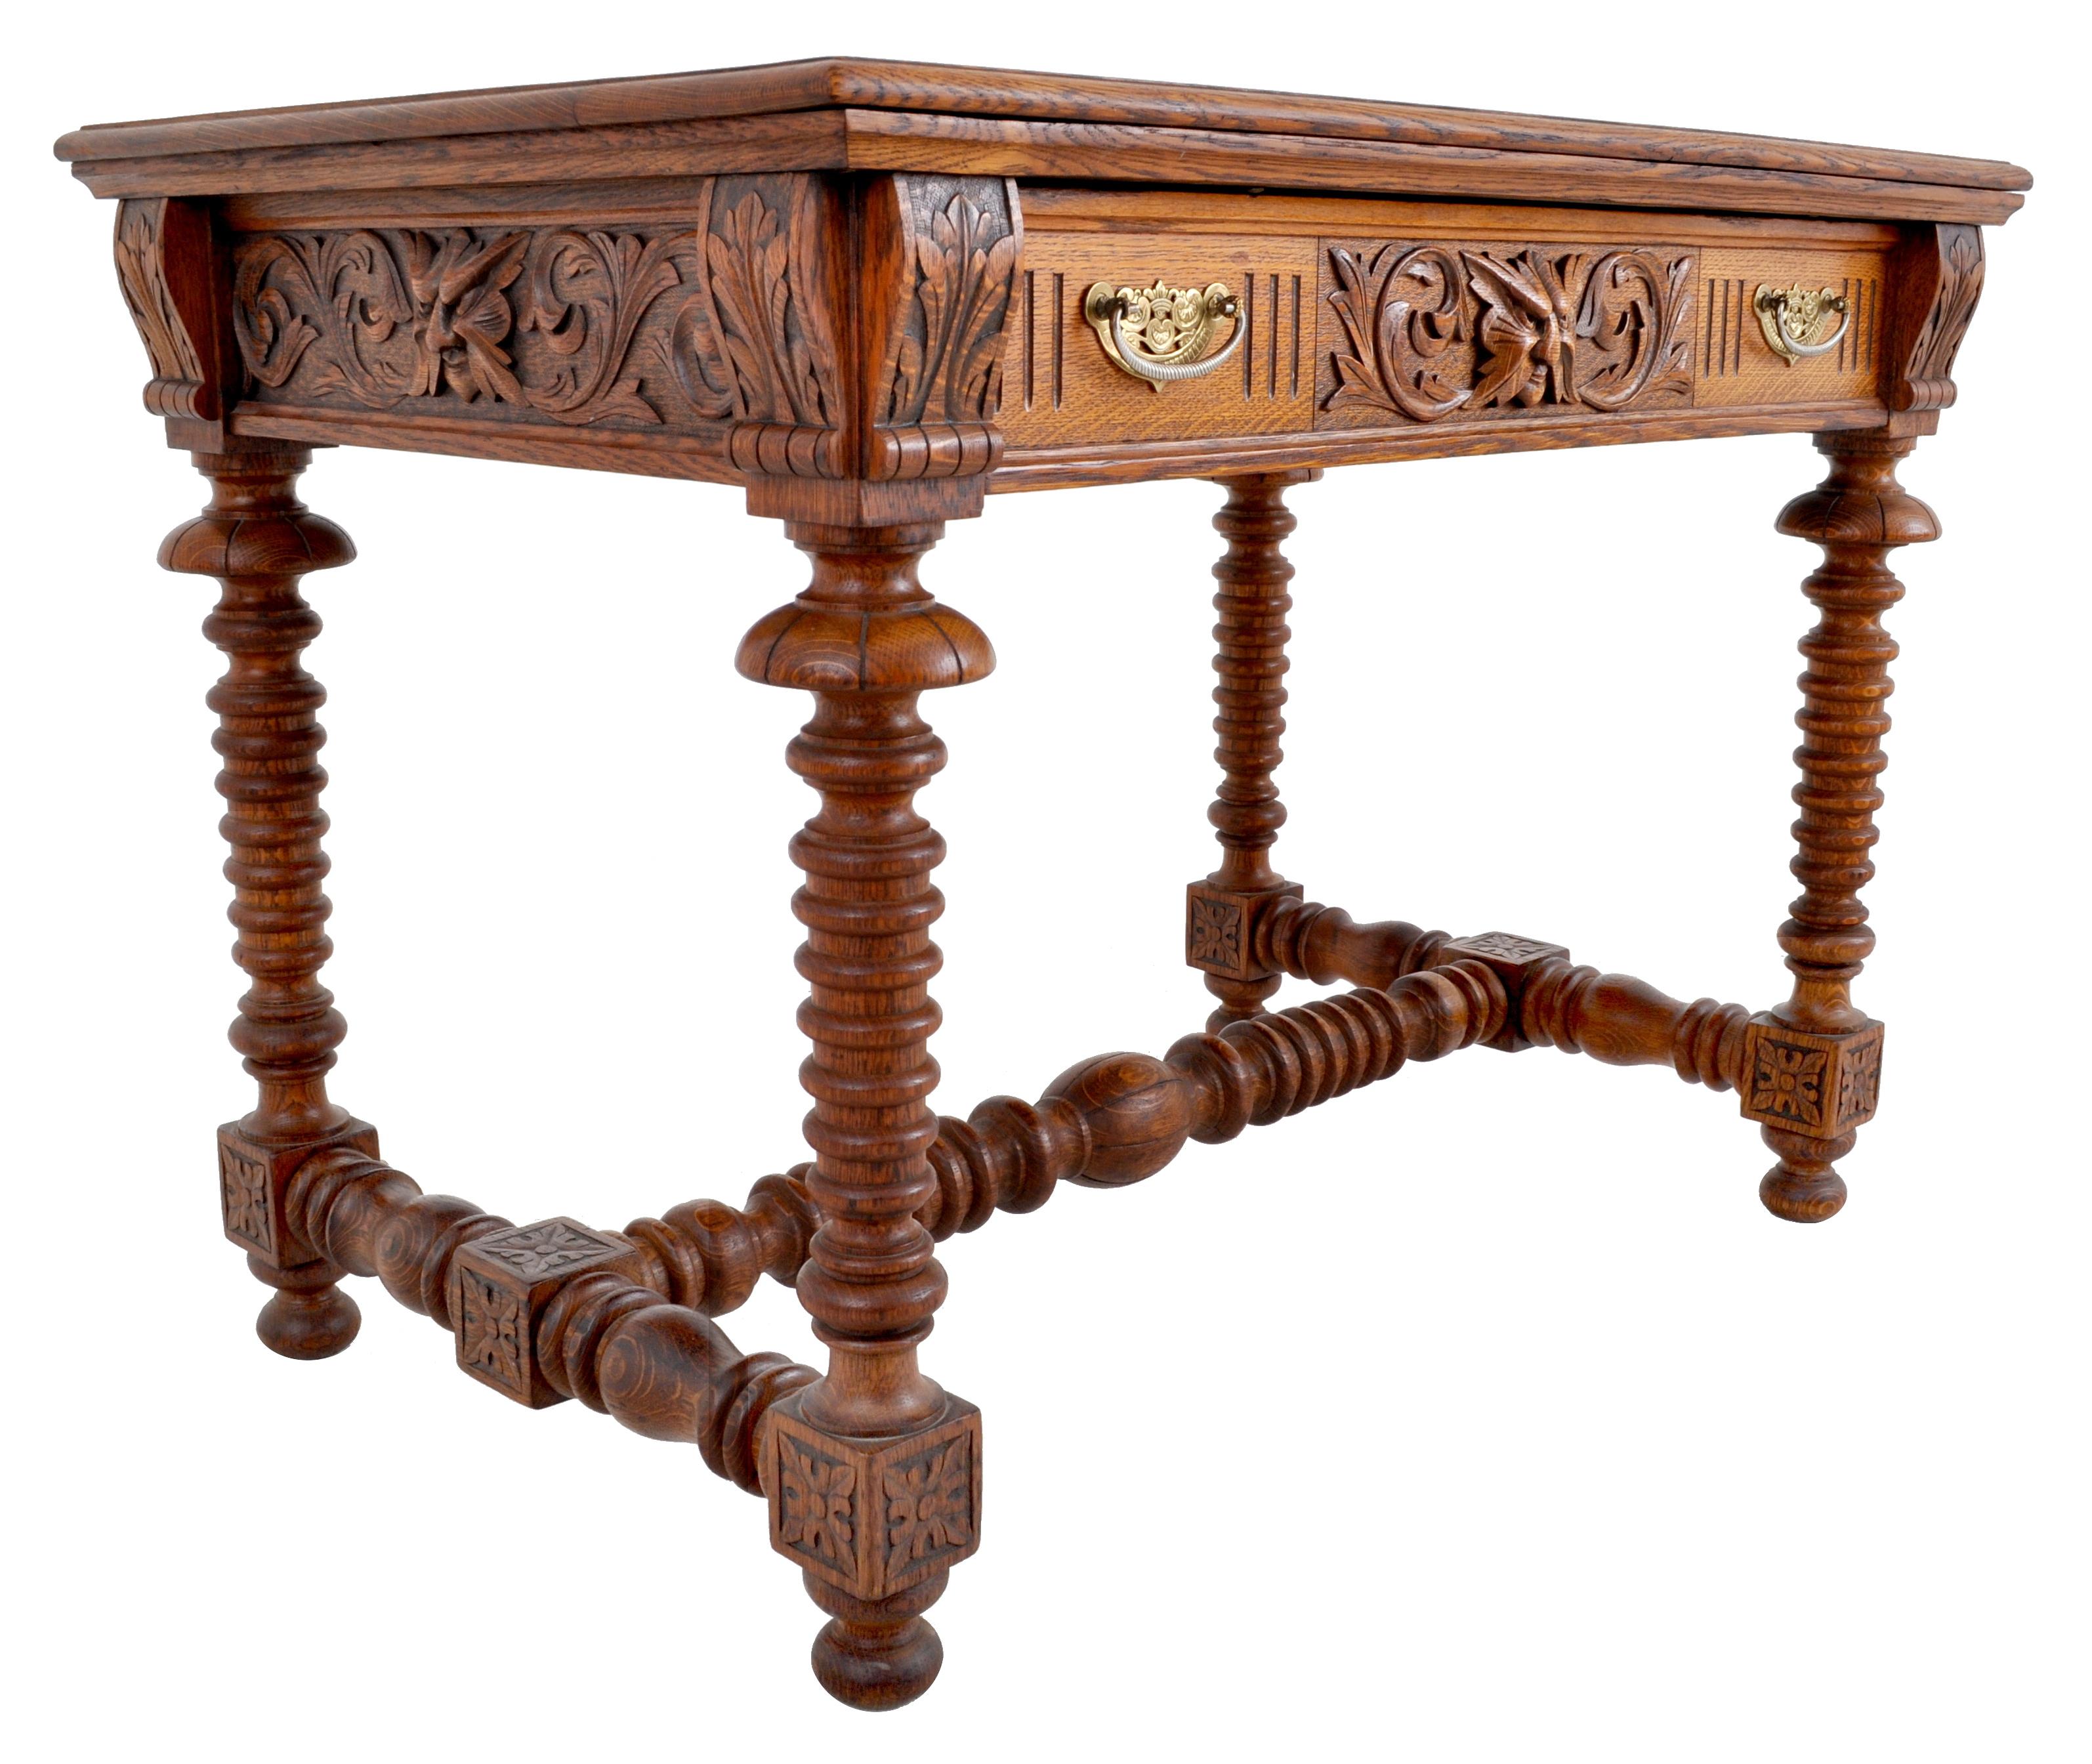 Antique American Arts & Crafts carved oak library / writing table / desk in the style of R. J. Horner, circa 1890. The table having a shaped top supported by corbel brackets decorated with carved stylized oak leaves, the front having a single-drawer